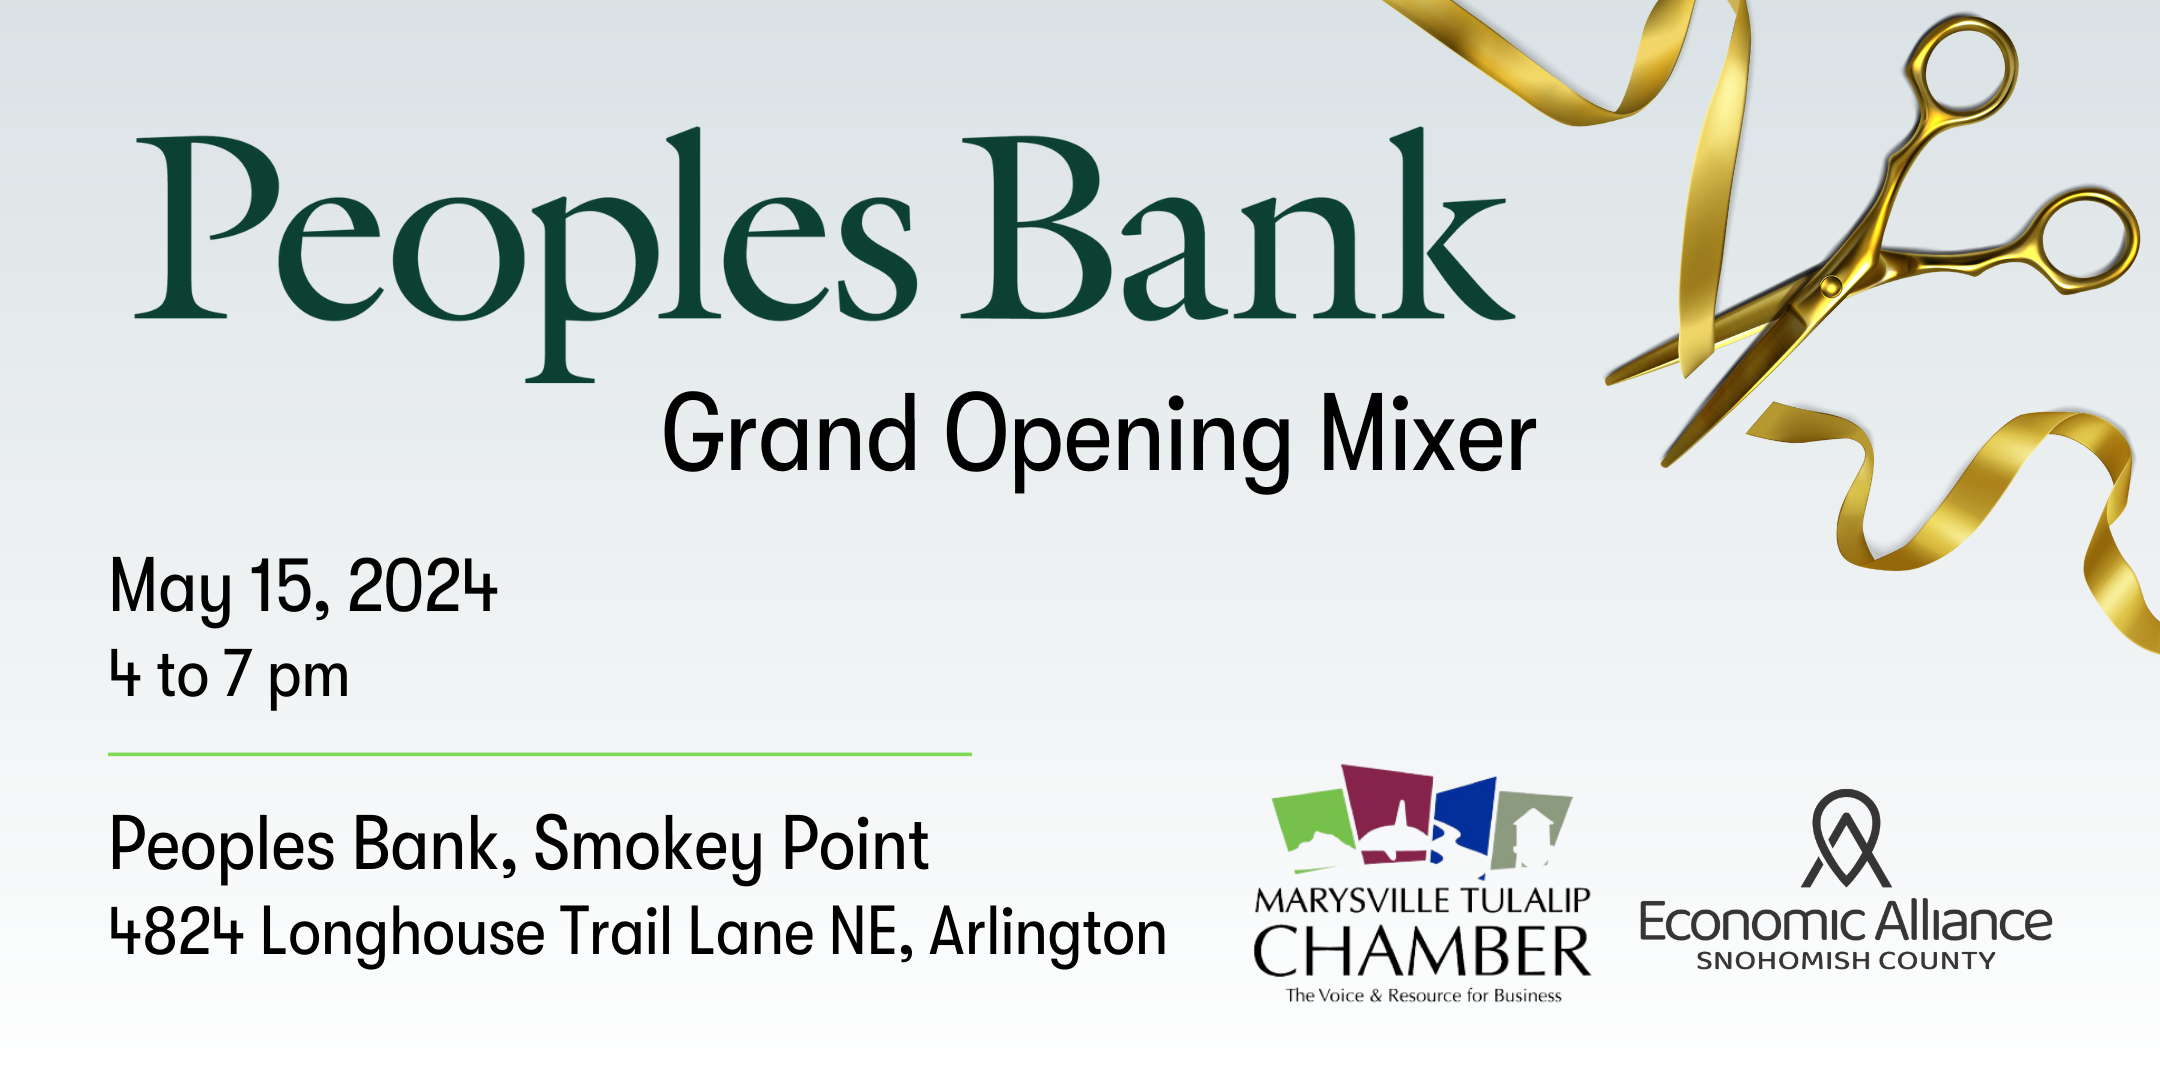 Peoples Bank Grand Opening Mixer Photo